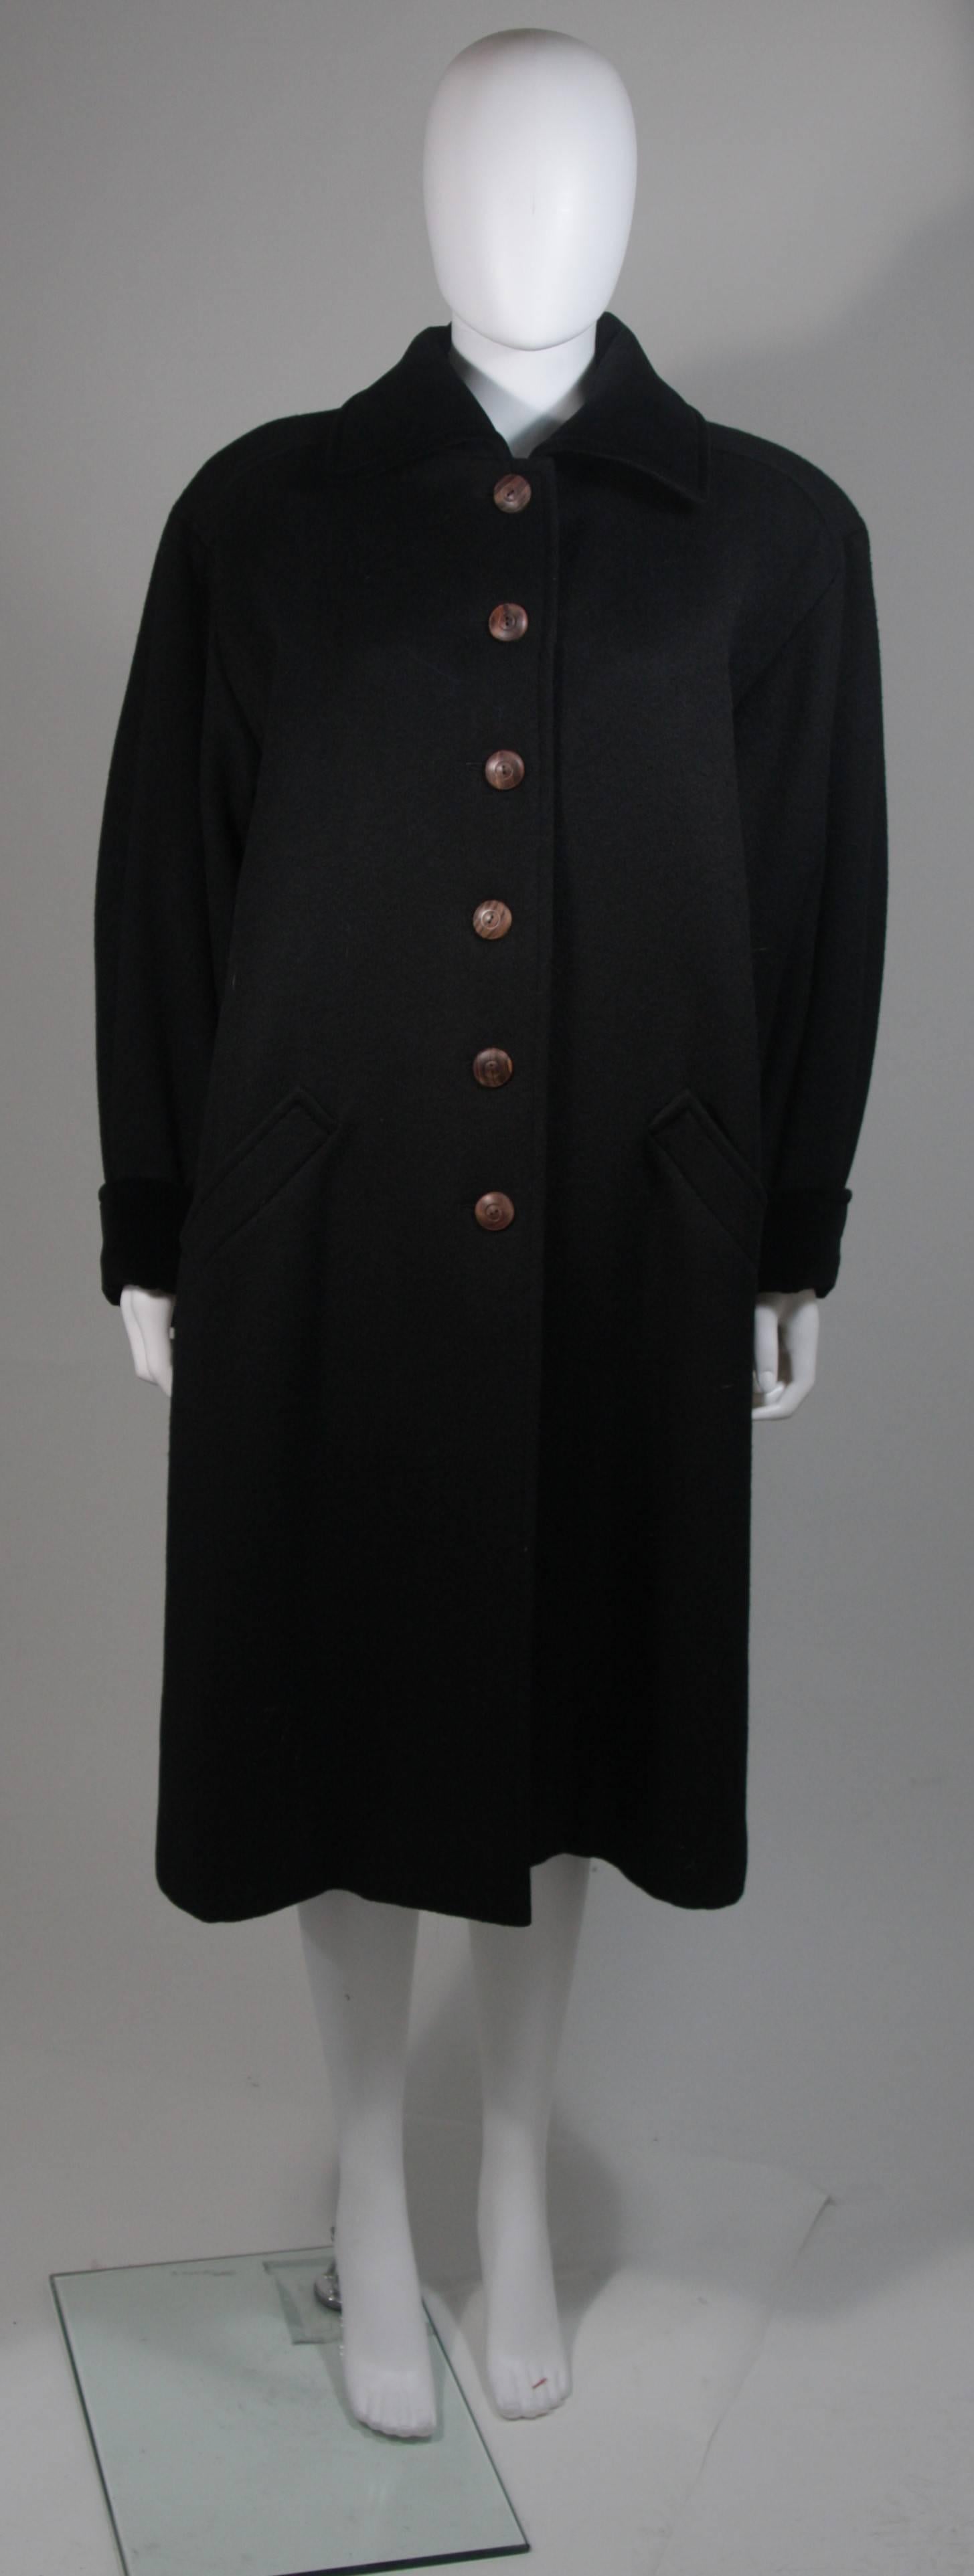 This Yves Saint Laurent design is available for viewing at our Beverly Hills Boutique. We offer a large selection of evening gowns and luxury garments. 

 This coat is composed of black wool with velvet trim. The coat features center front wood